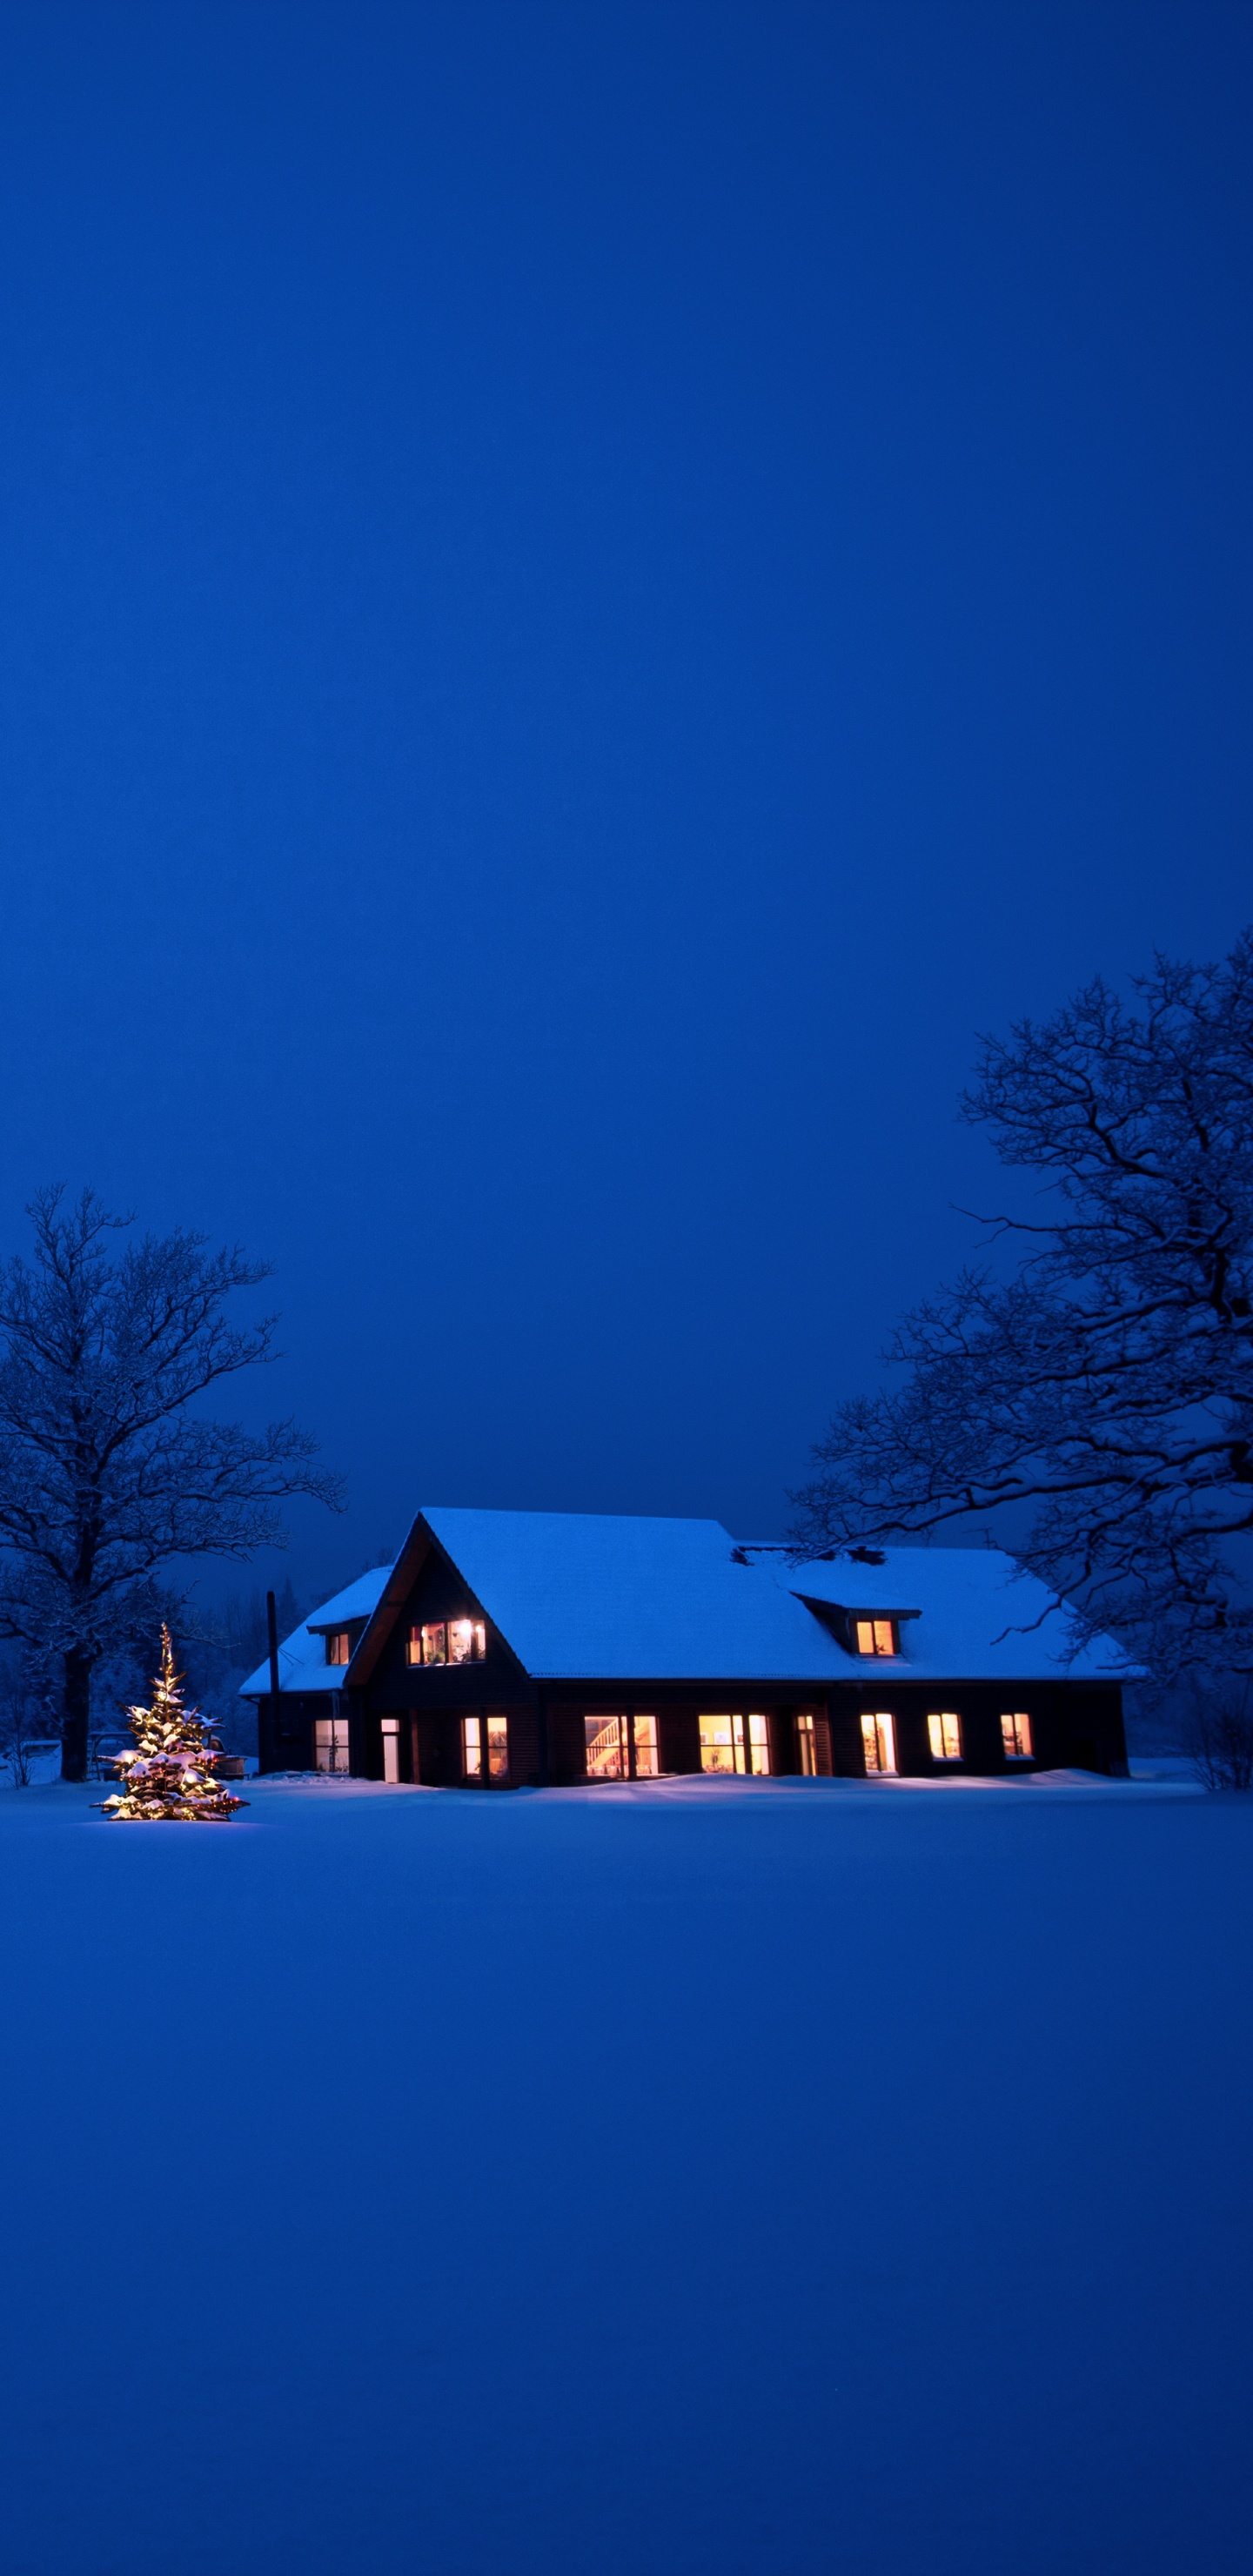 Brown Wooden House on Snow Covered Ground During Night Time. Wallpaper in 1440x2960 Resolution